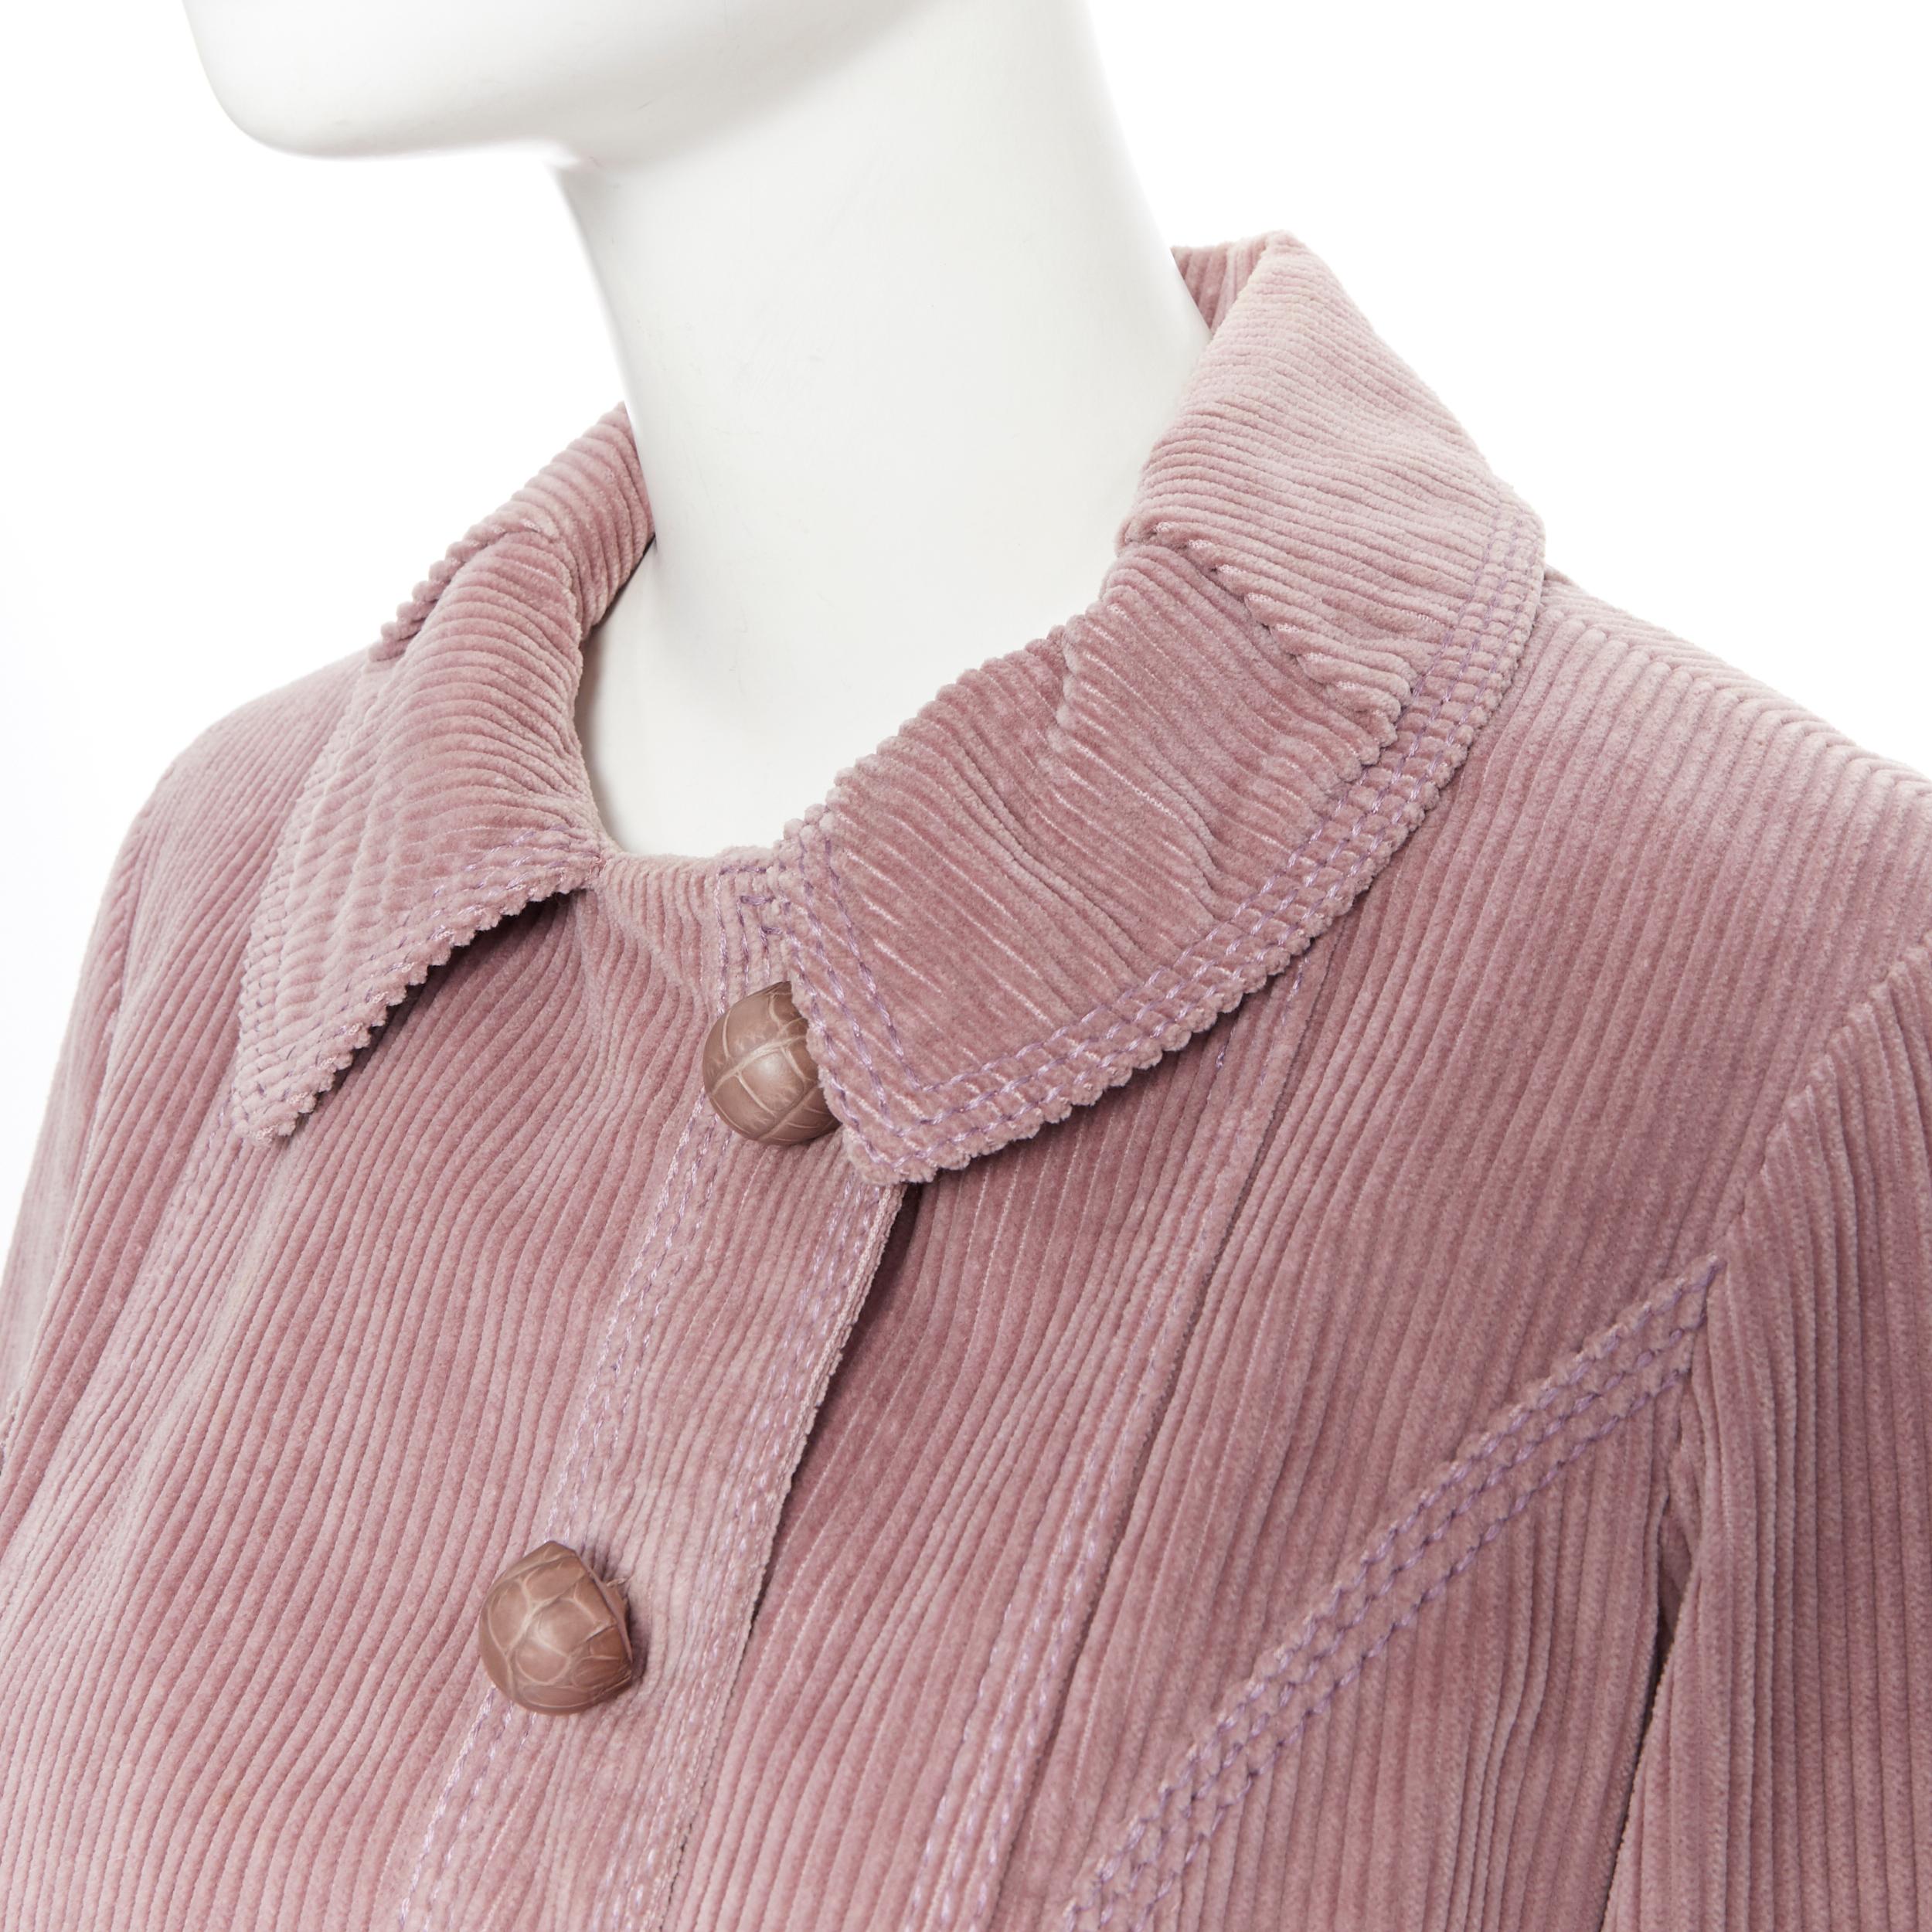 LOUIS VUITTON mauve corduroy leather wrapped button fitted casual jacket FR36 Reference: CC/JACN00385 Brand: Louis Vuitton Designer: Marc Jacobs Material: Cotton Color: Purple Pattern: Solid Closure: Button Made in: France CONDITION: Condition: Very